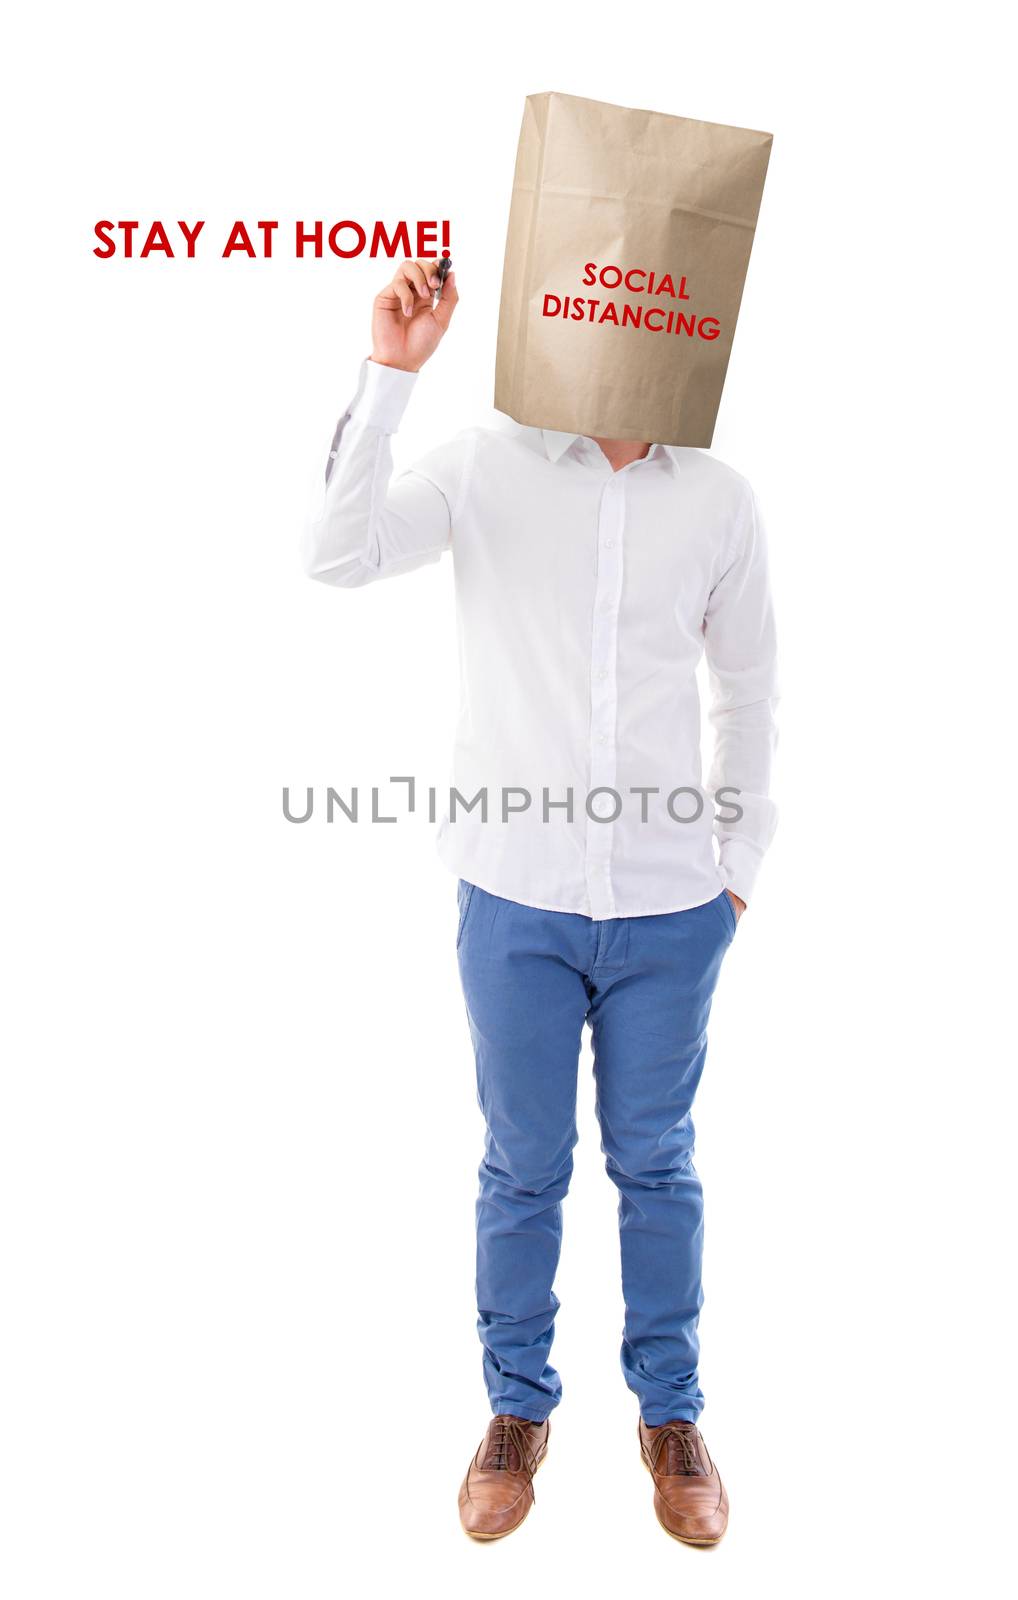 Social distancing to avoid the spread of coronavirus. Man covered head with paper bag.